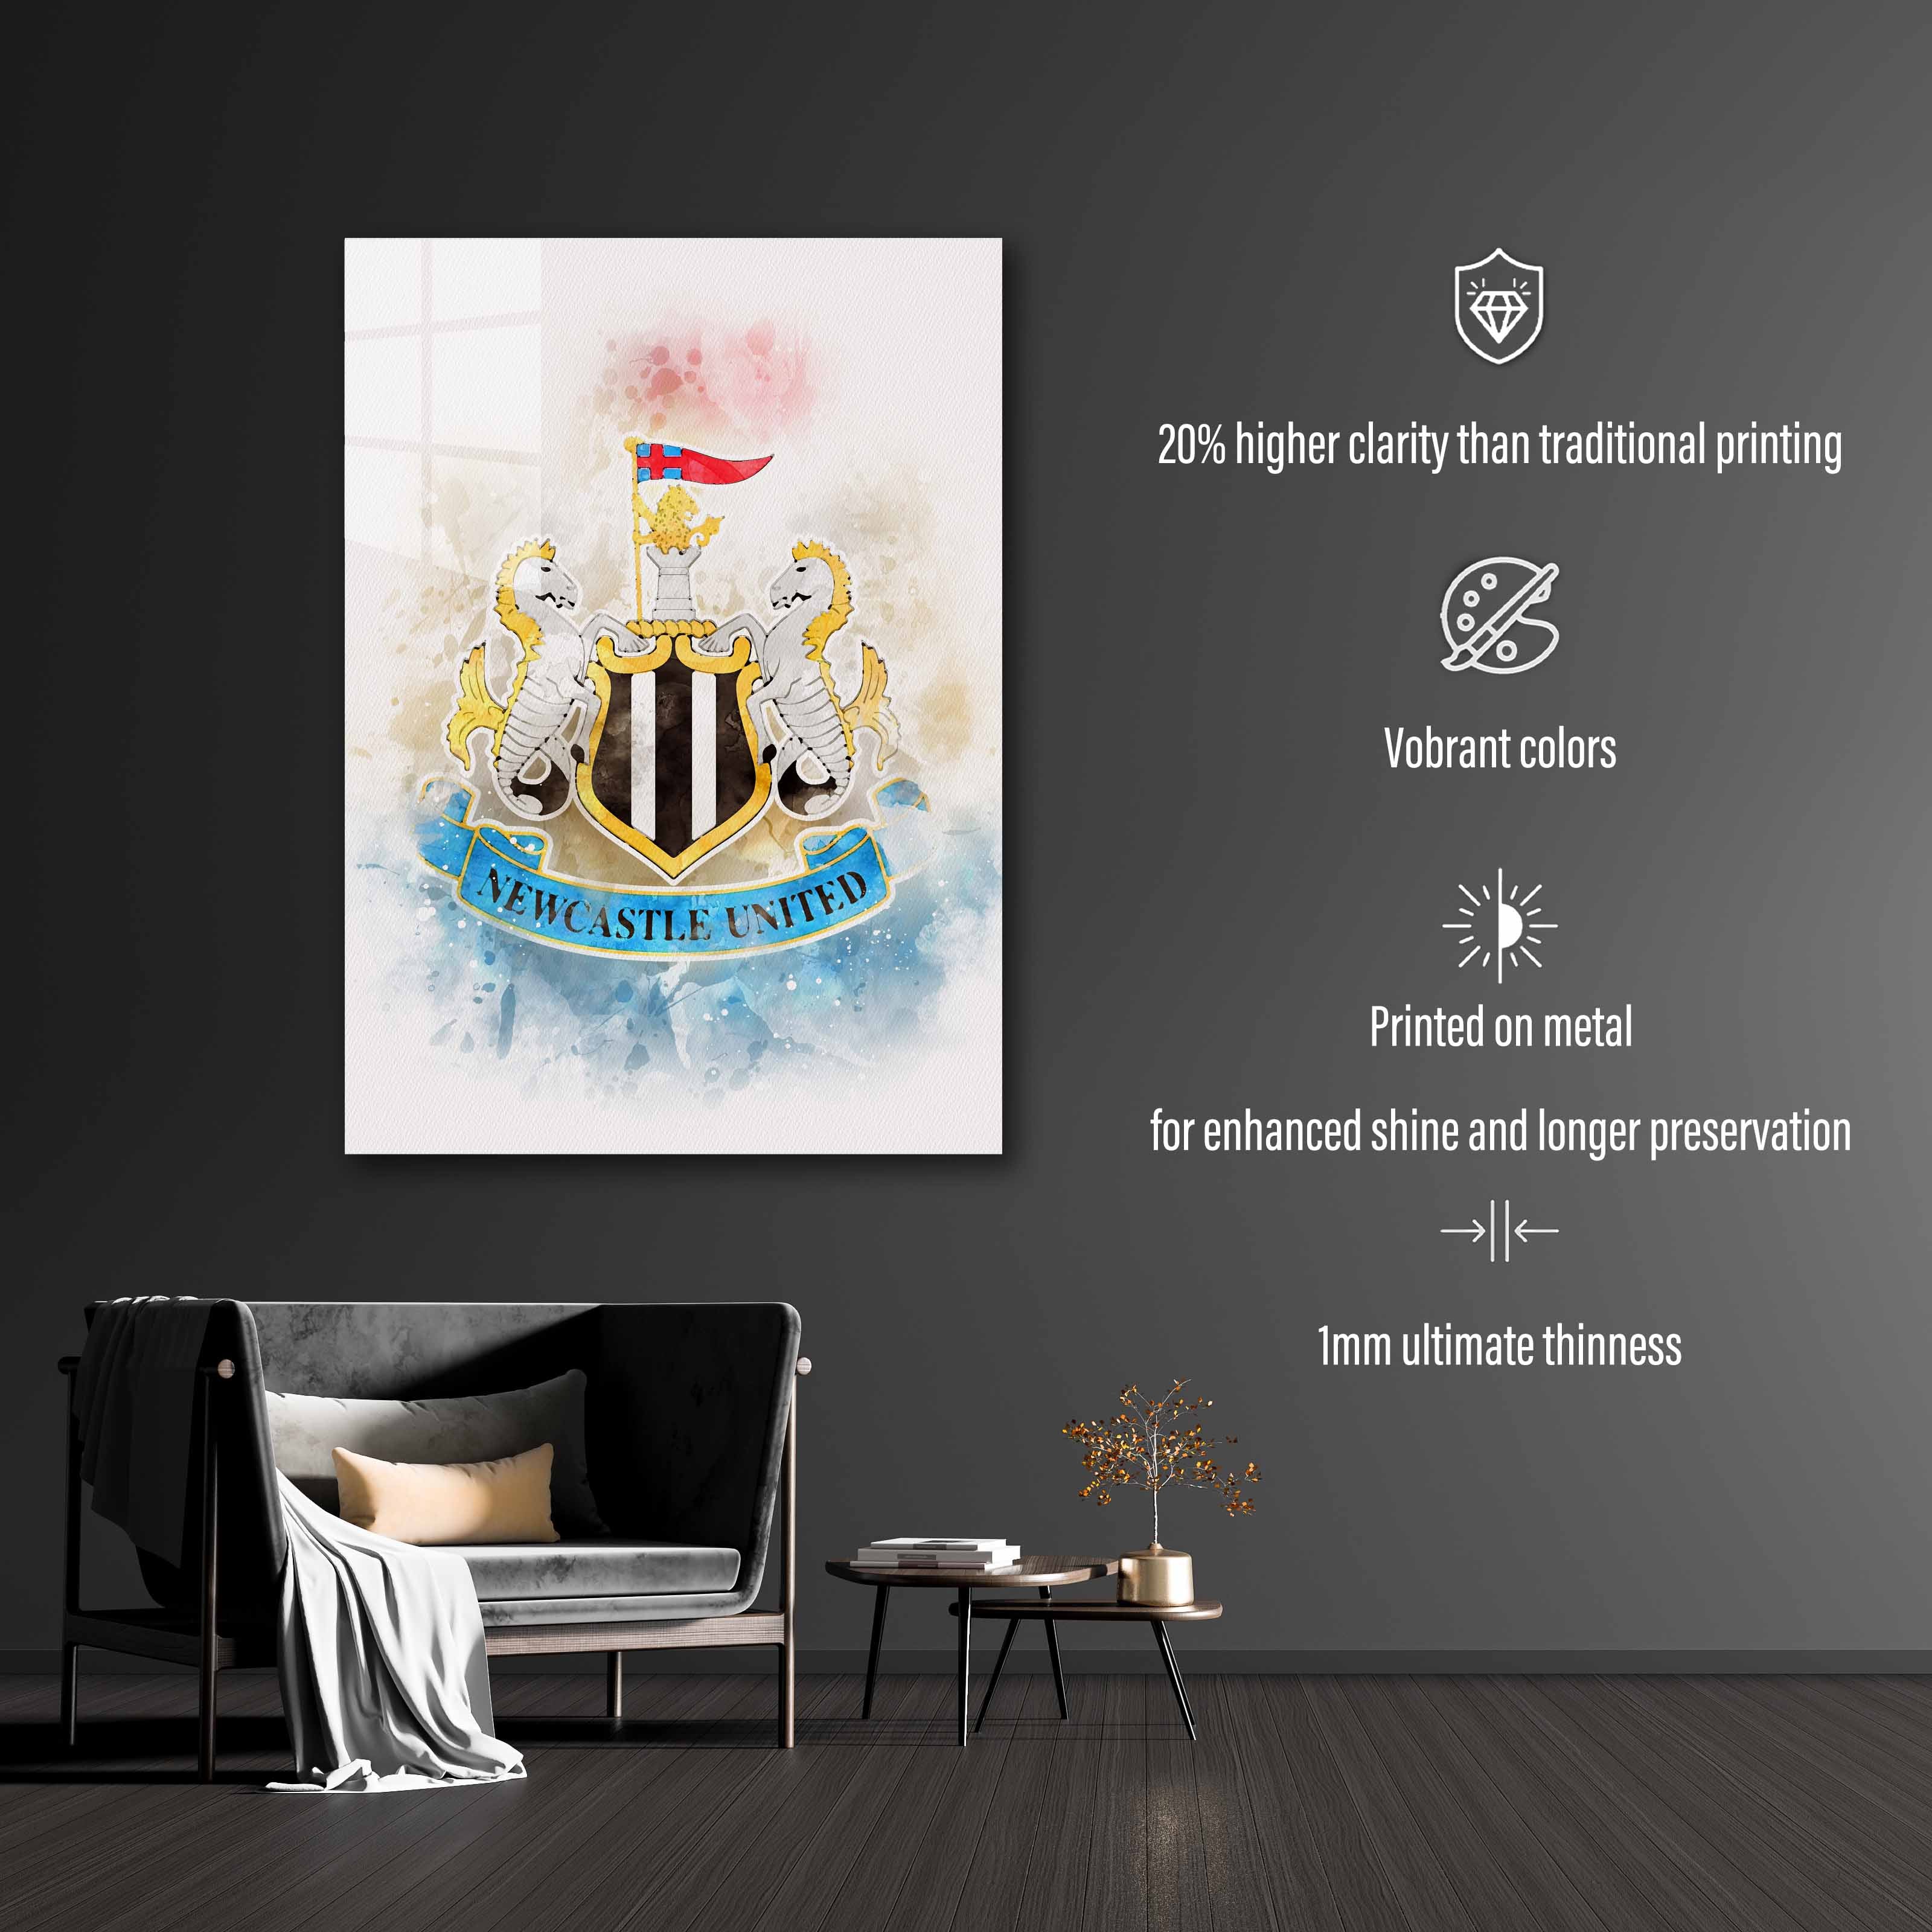 Newcastle United poster